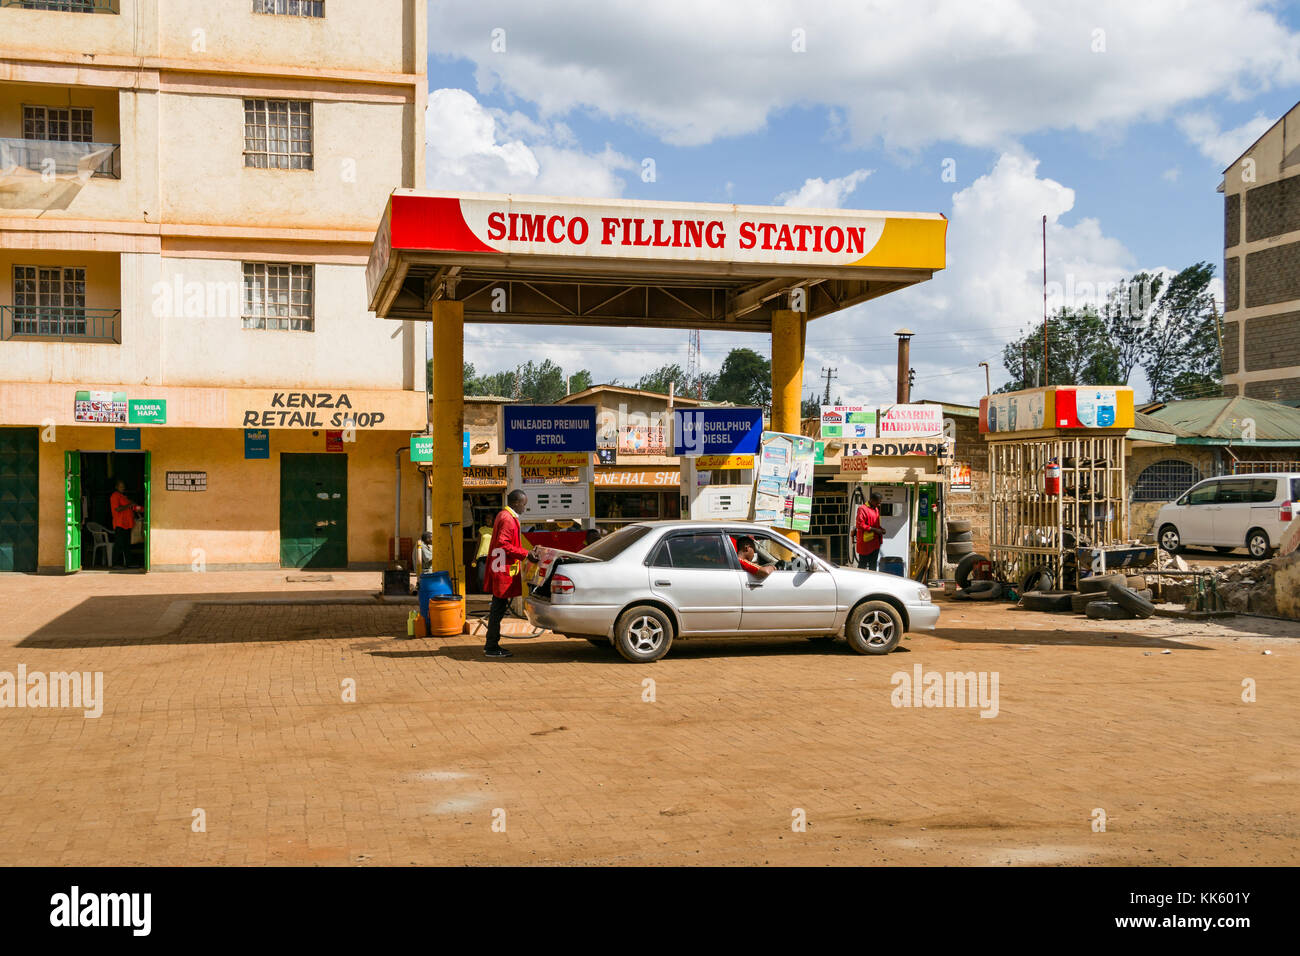 A SIMCO petrol filling station with attendants and customers in vehicle refuelling, Kenya, East Africa Stock Photo